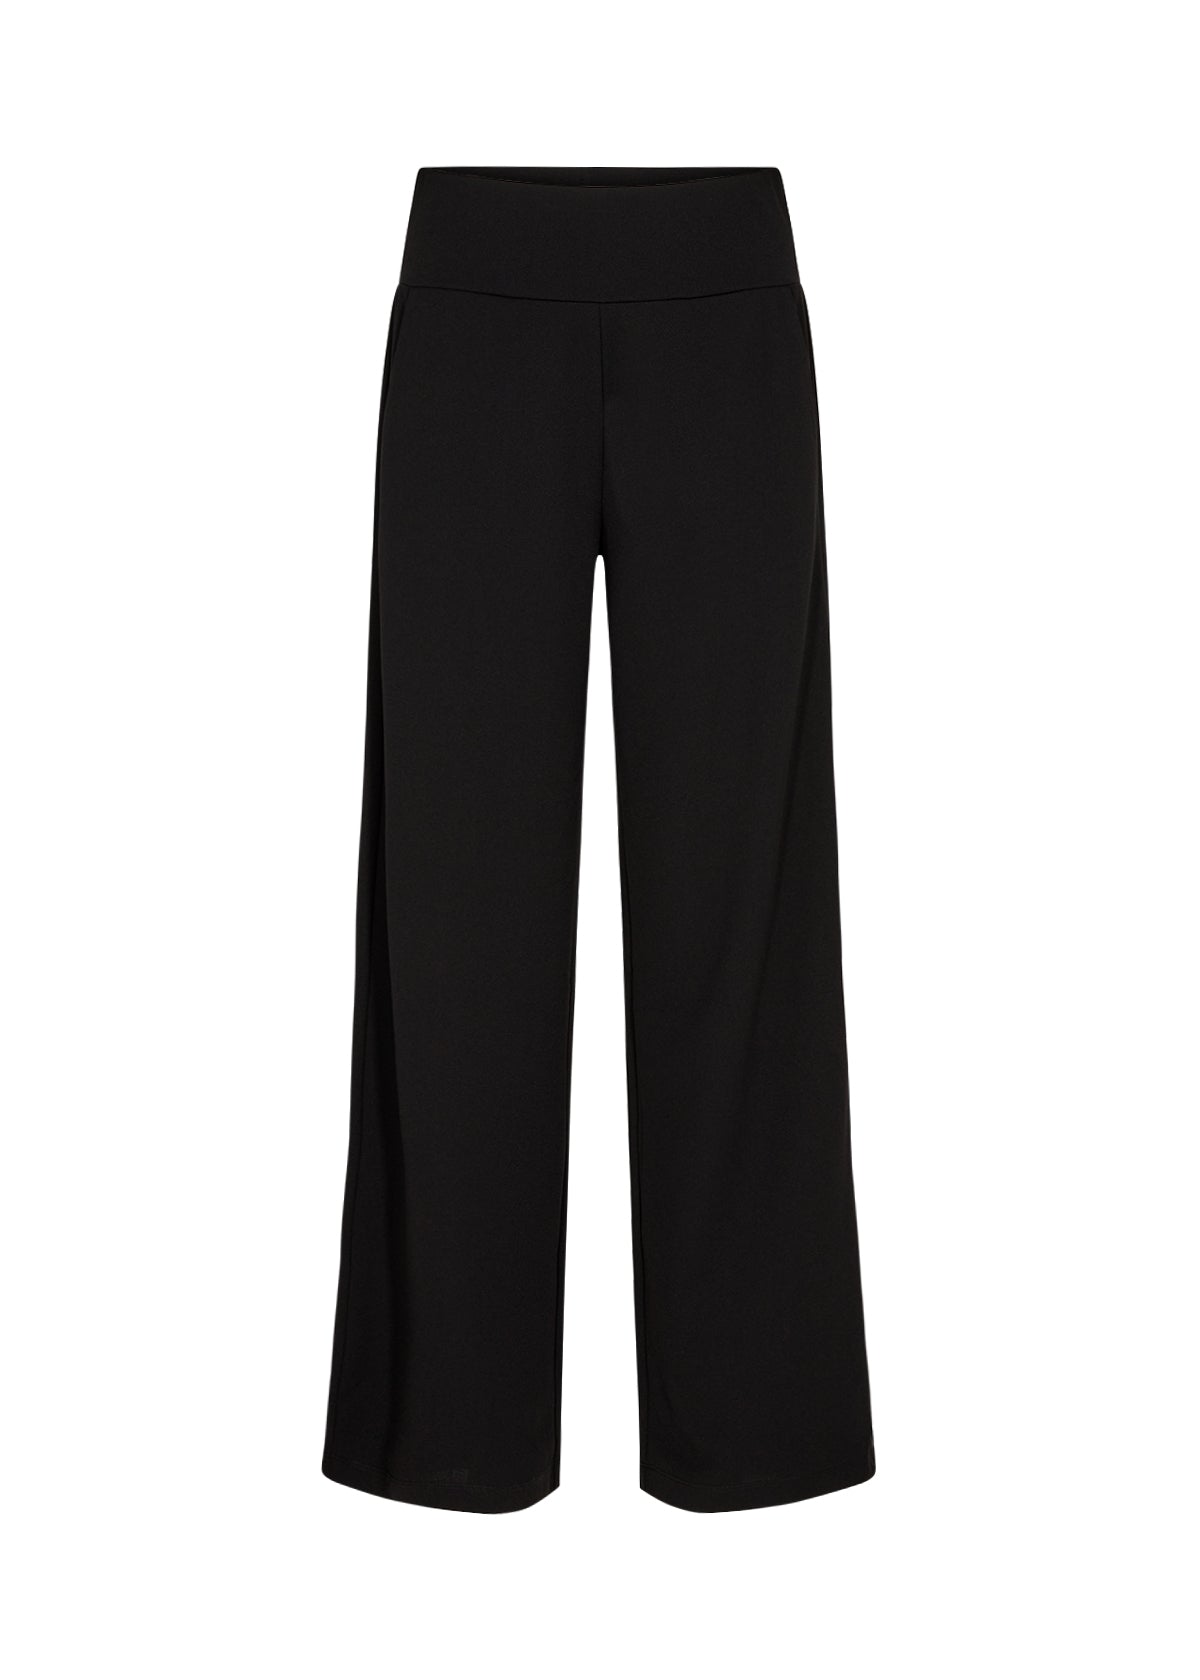 Soya Concept Siham Black Trousers